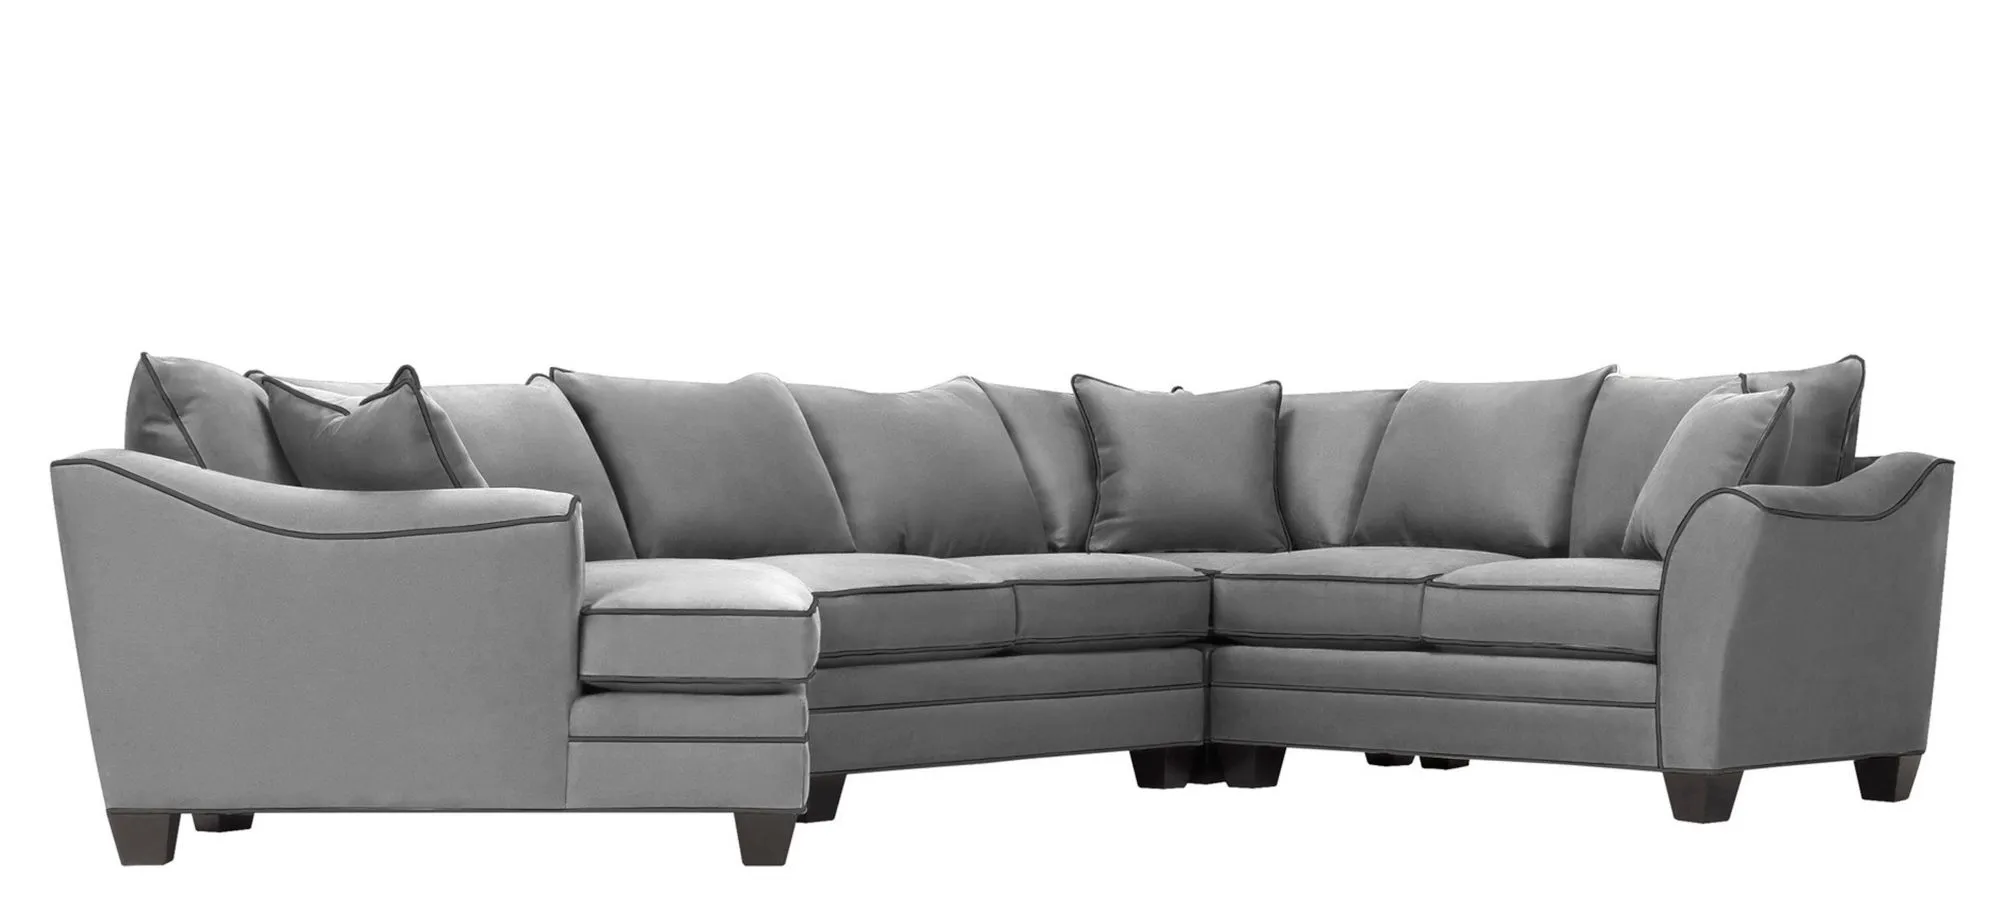 Foresthill 4-pc. Left Hand Cuddler Sectional Sofa in Suede So Soft Platinum/Slate by H.M. Richards